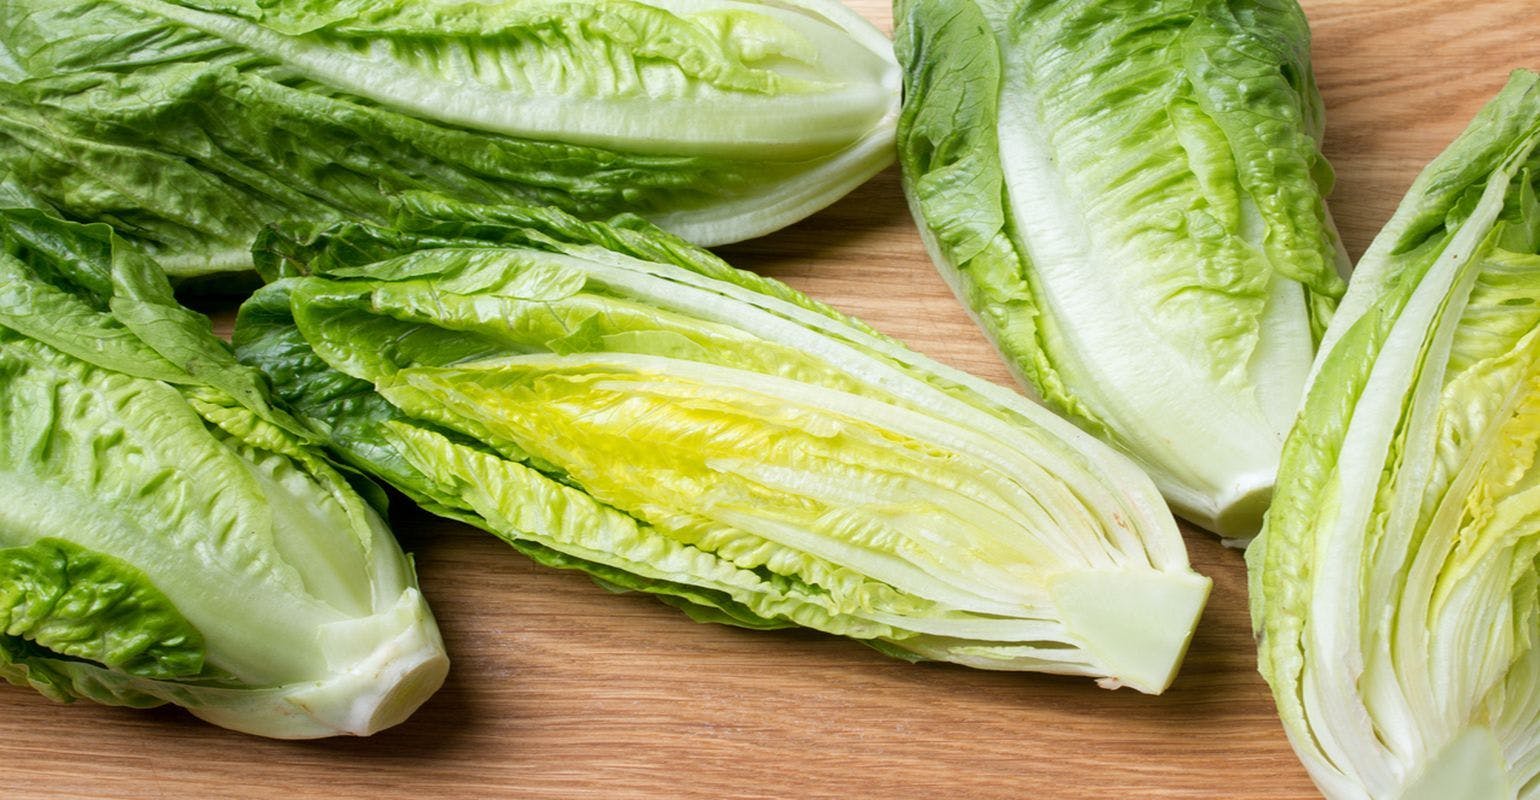 Public Health Agencies Investigating Outbreak Linked to Romaine Lettuce